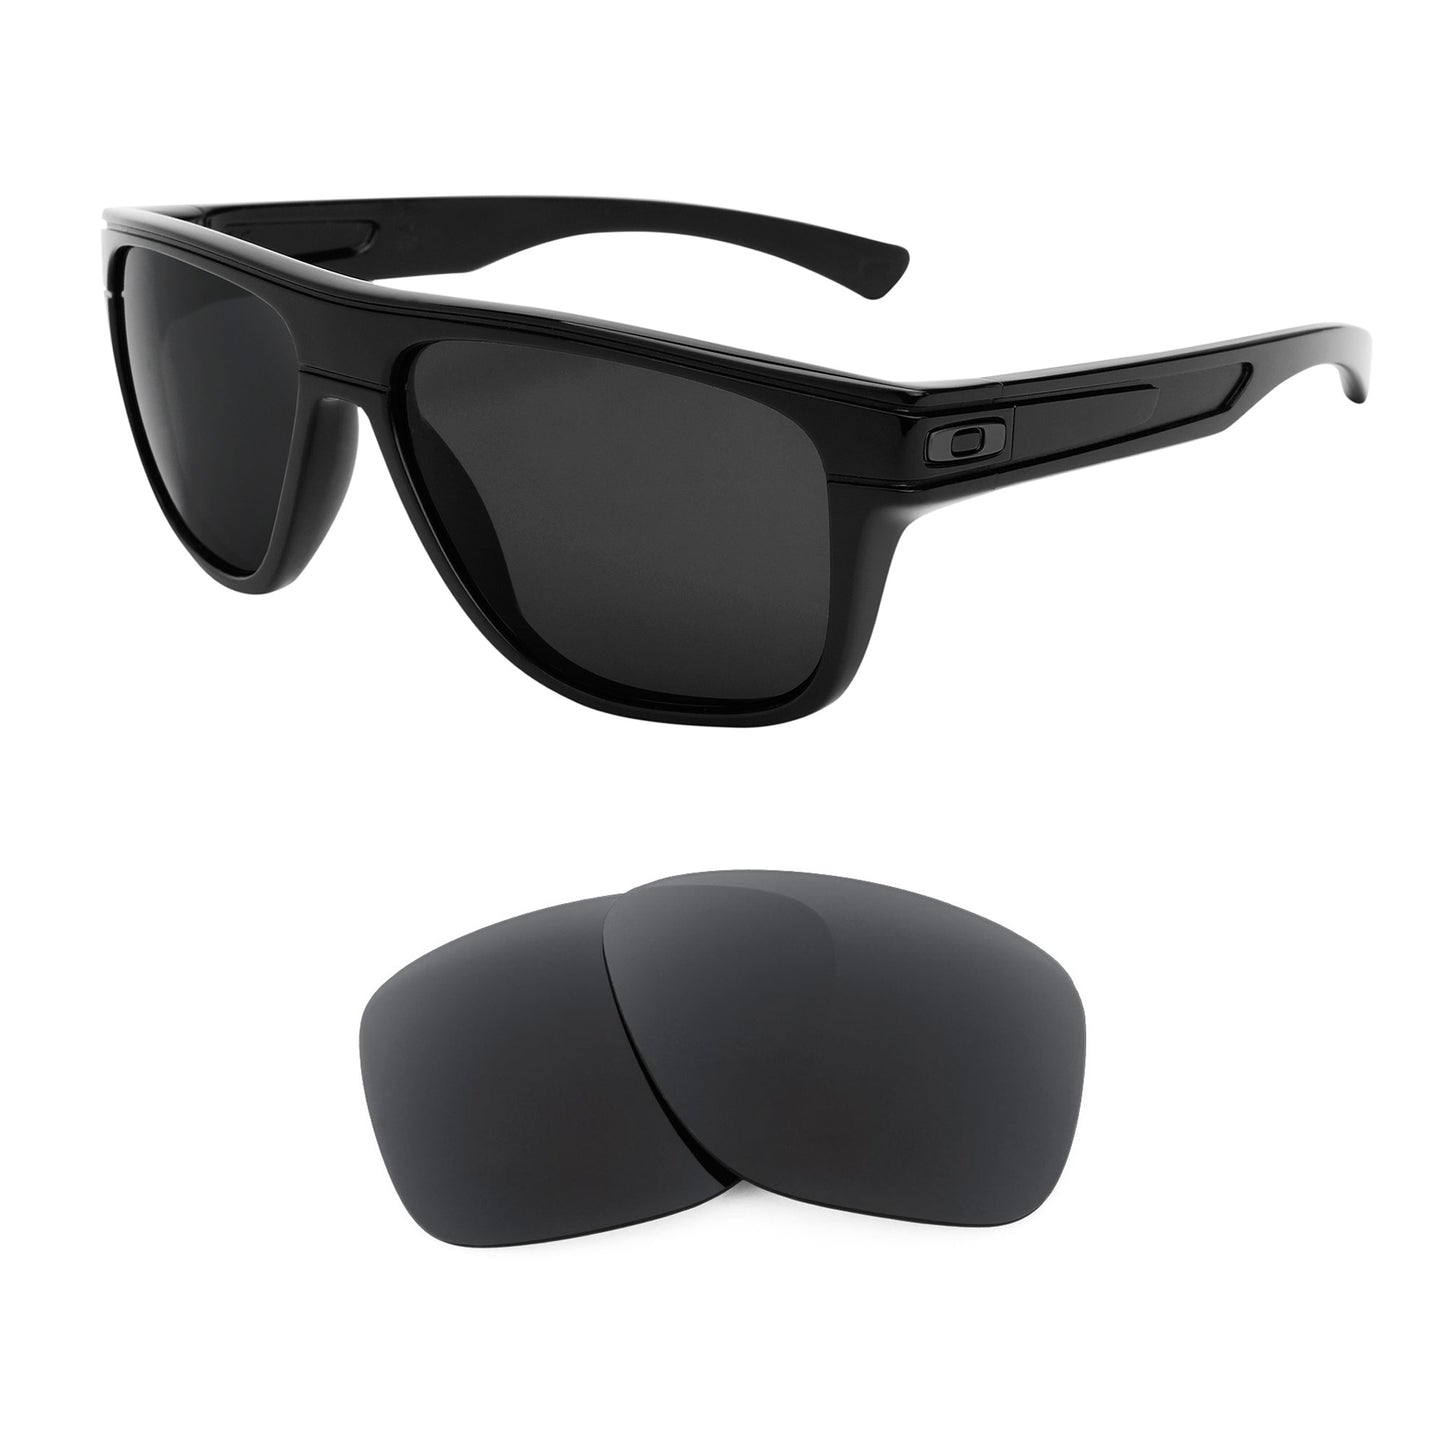 Oakley Breadbox sunglasses with replacement lenses